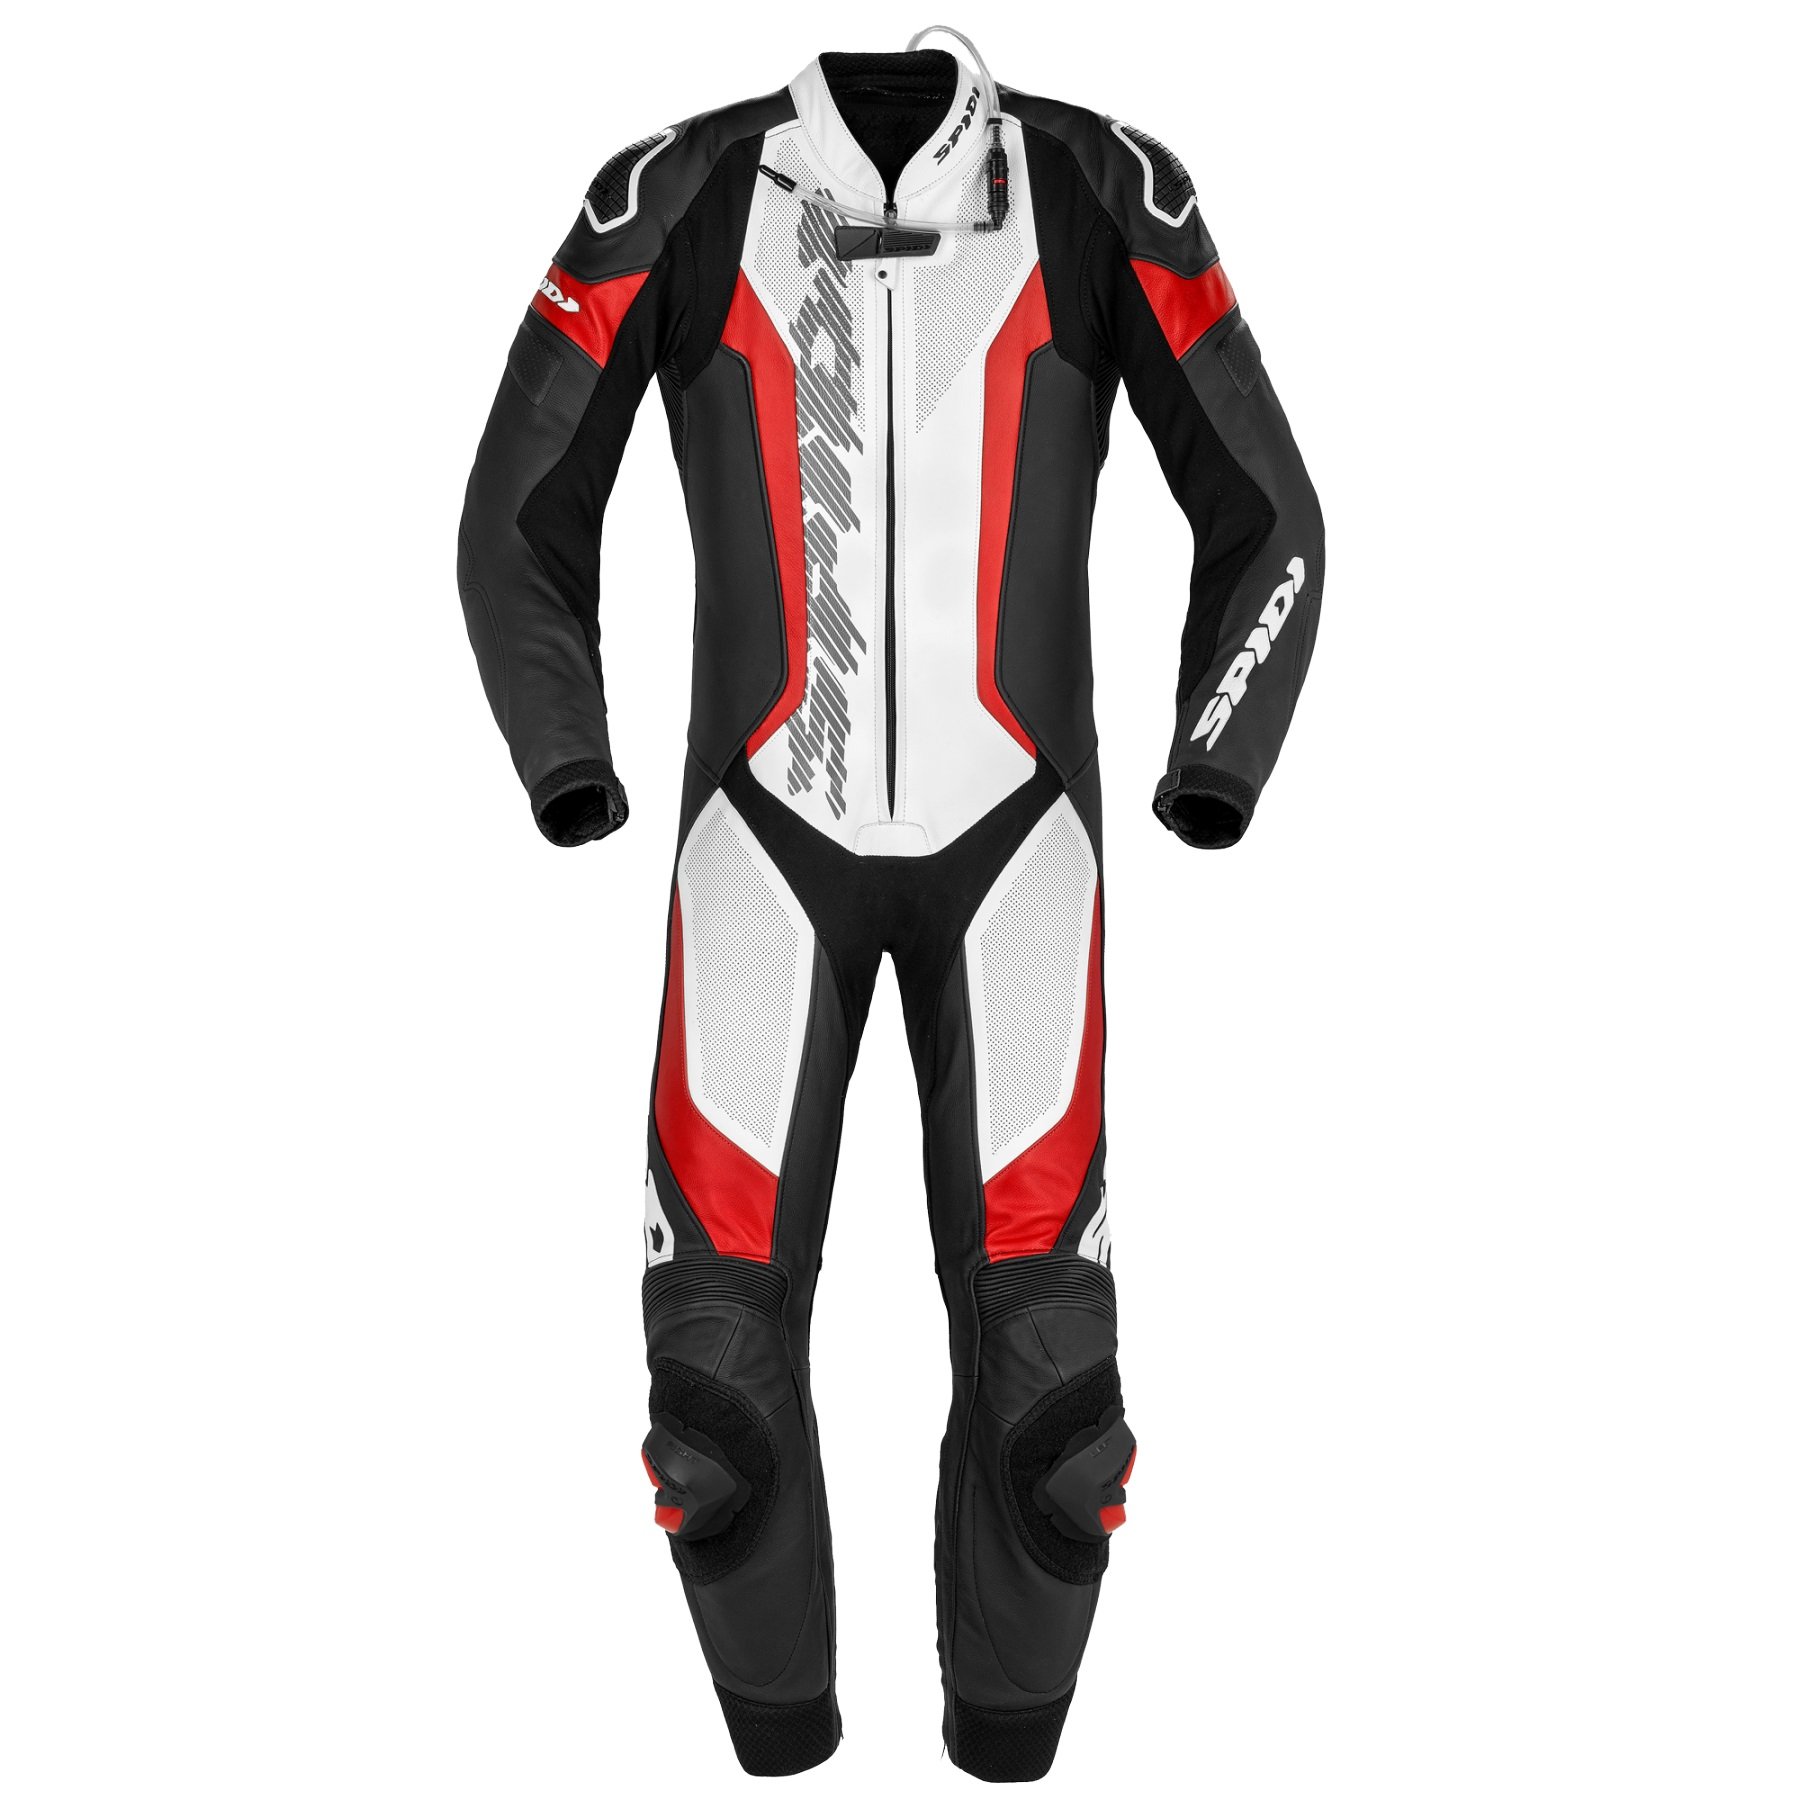 Image of Spidi Laser Pro Perforated Red 1 Piece Motorcycle Racing Suit Talla 48